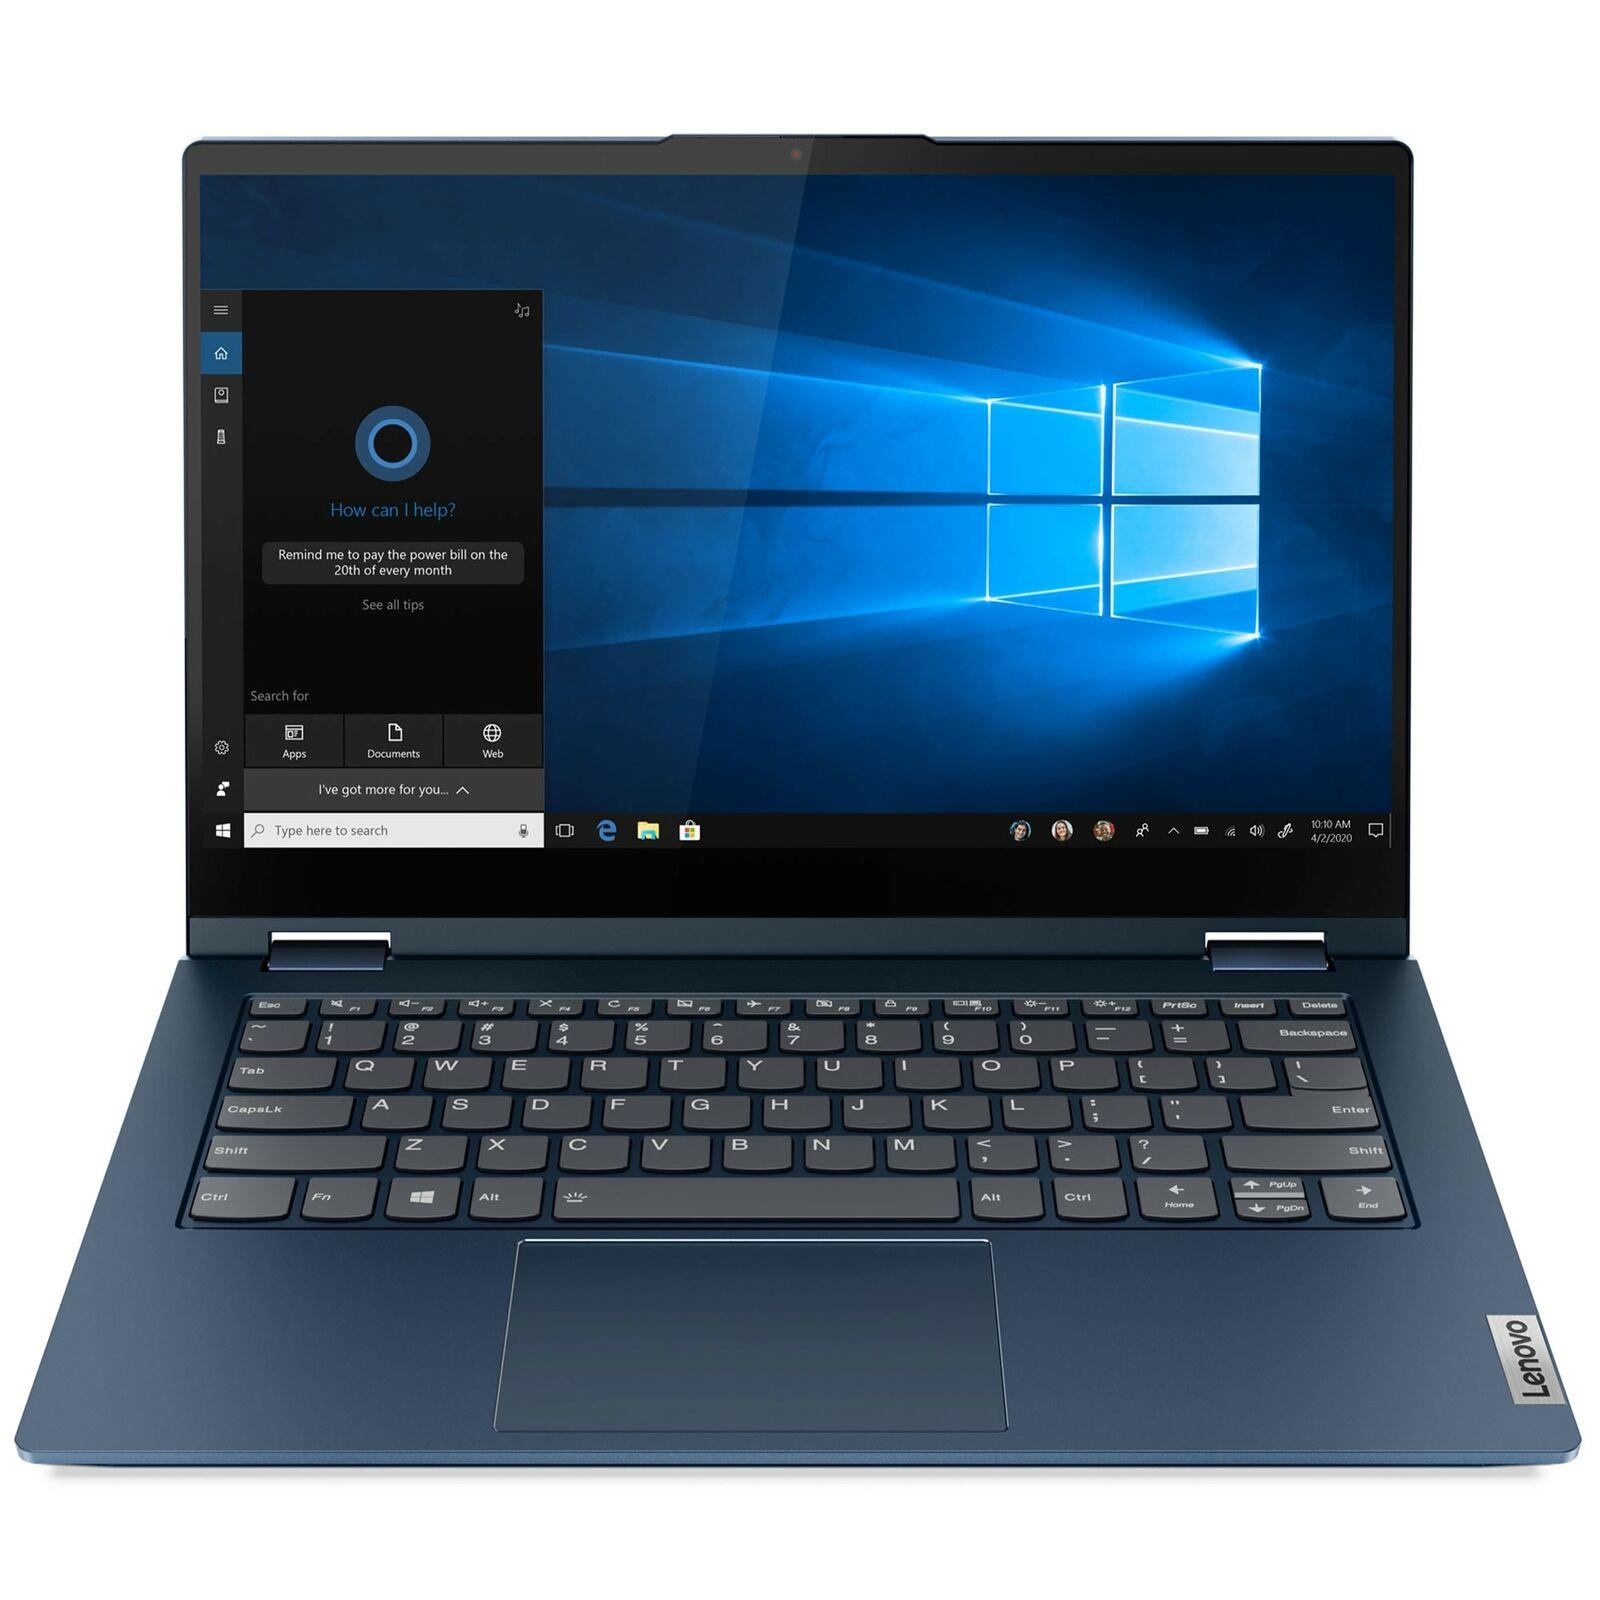 Lenovo ThinkBook 14s Yoga 2-in-1 i7 16GB Laptop for $749.99 Shipped